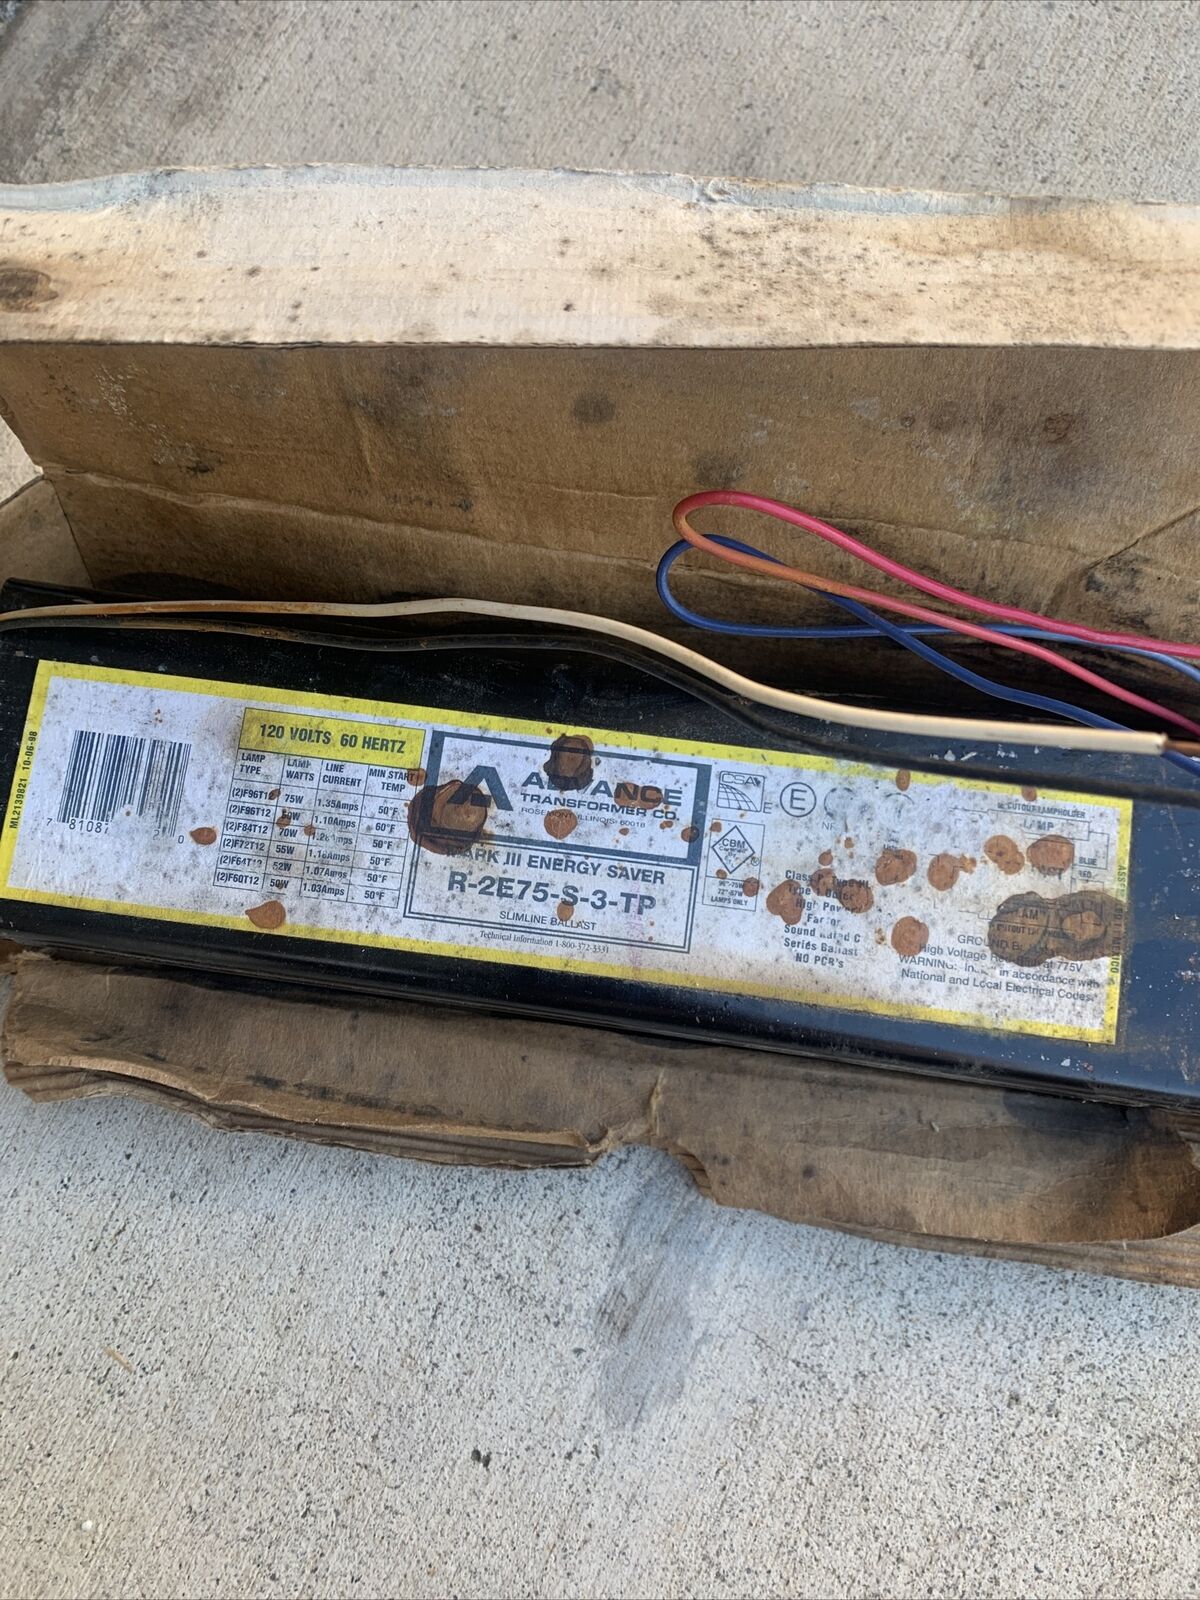 Advance Transformer Co. Mark III Energy STAINED Outside But Wires Look NEW